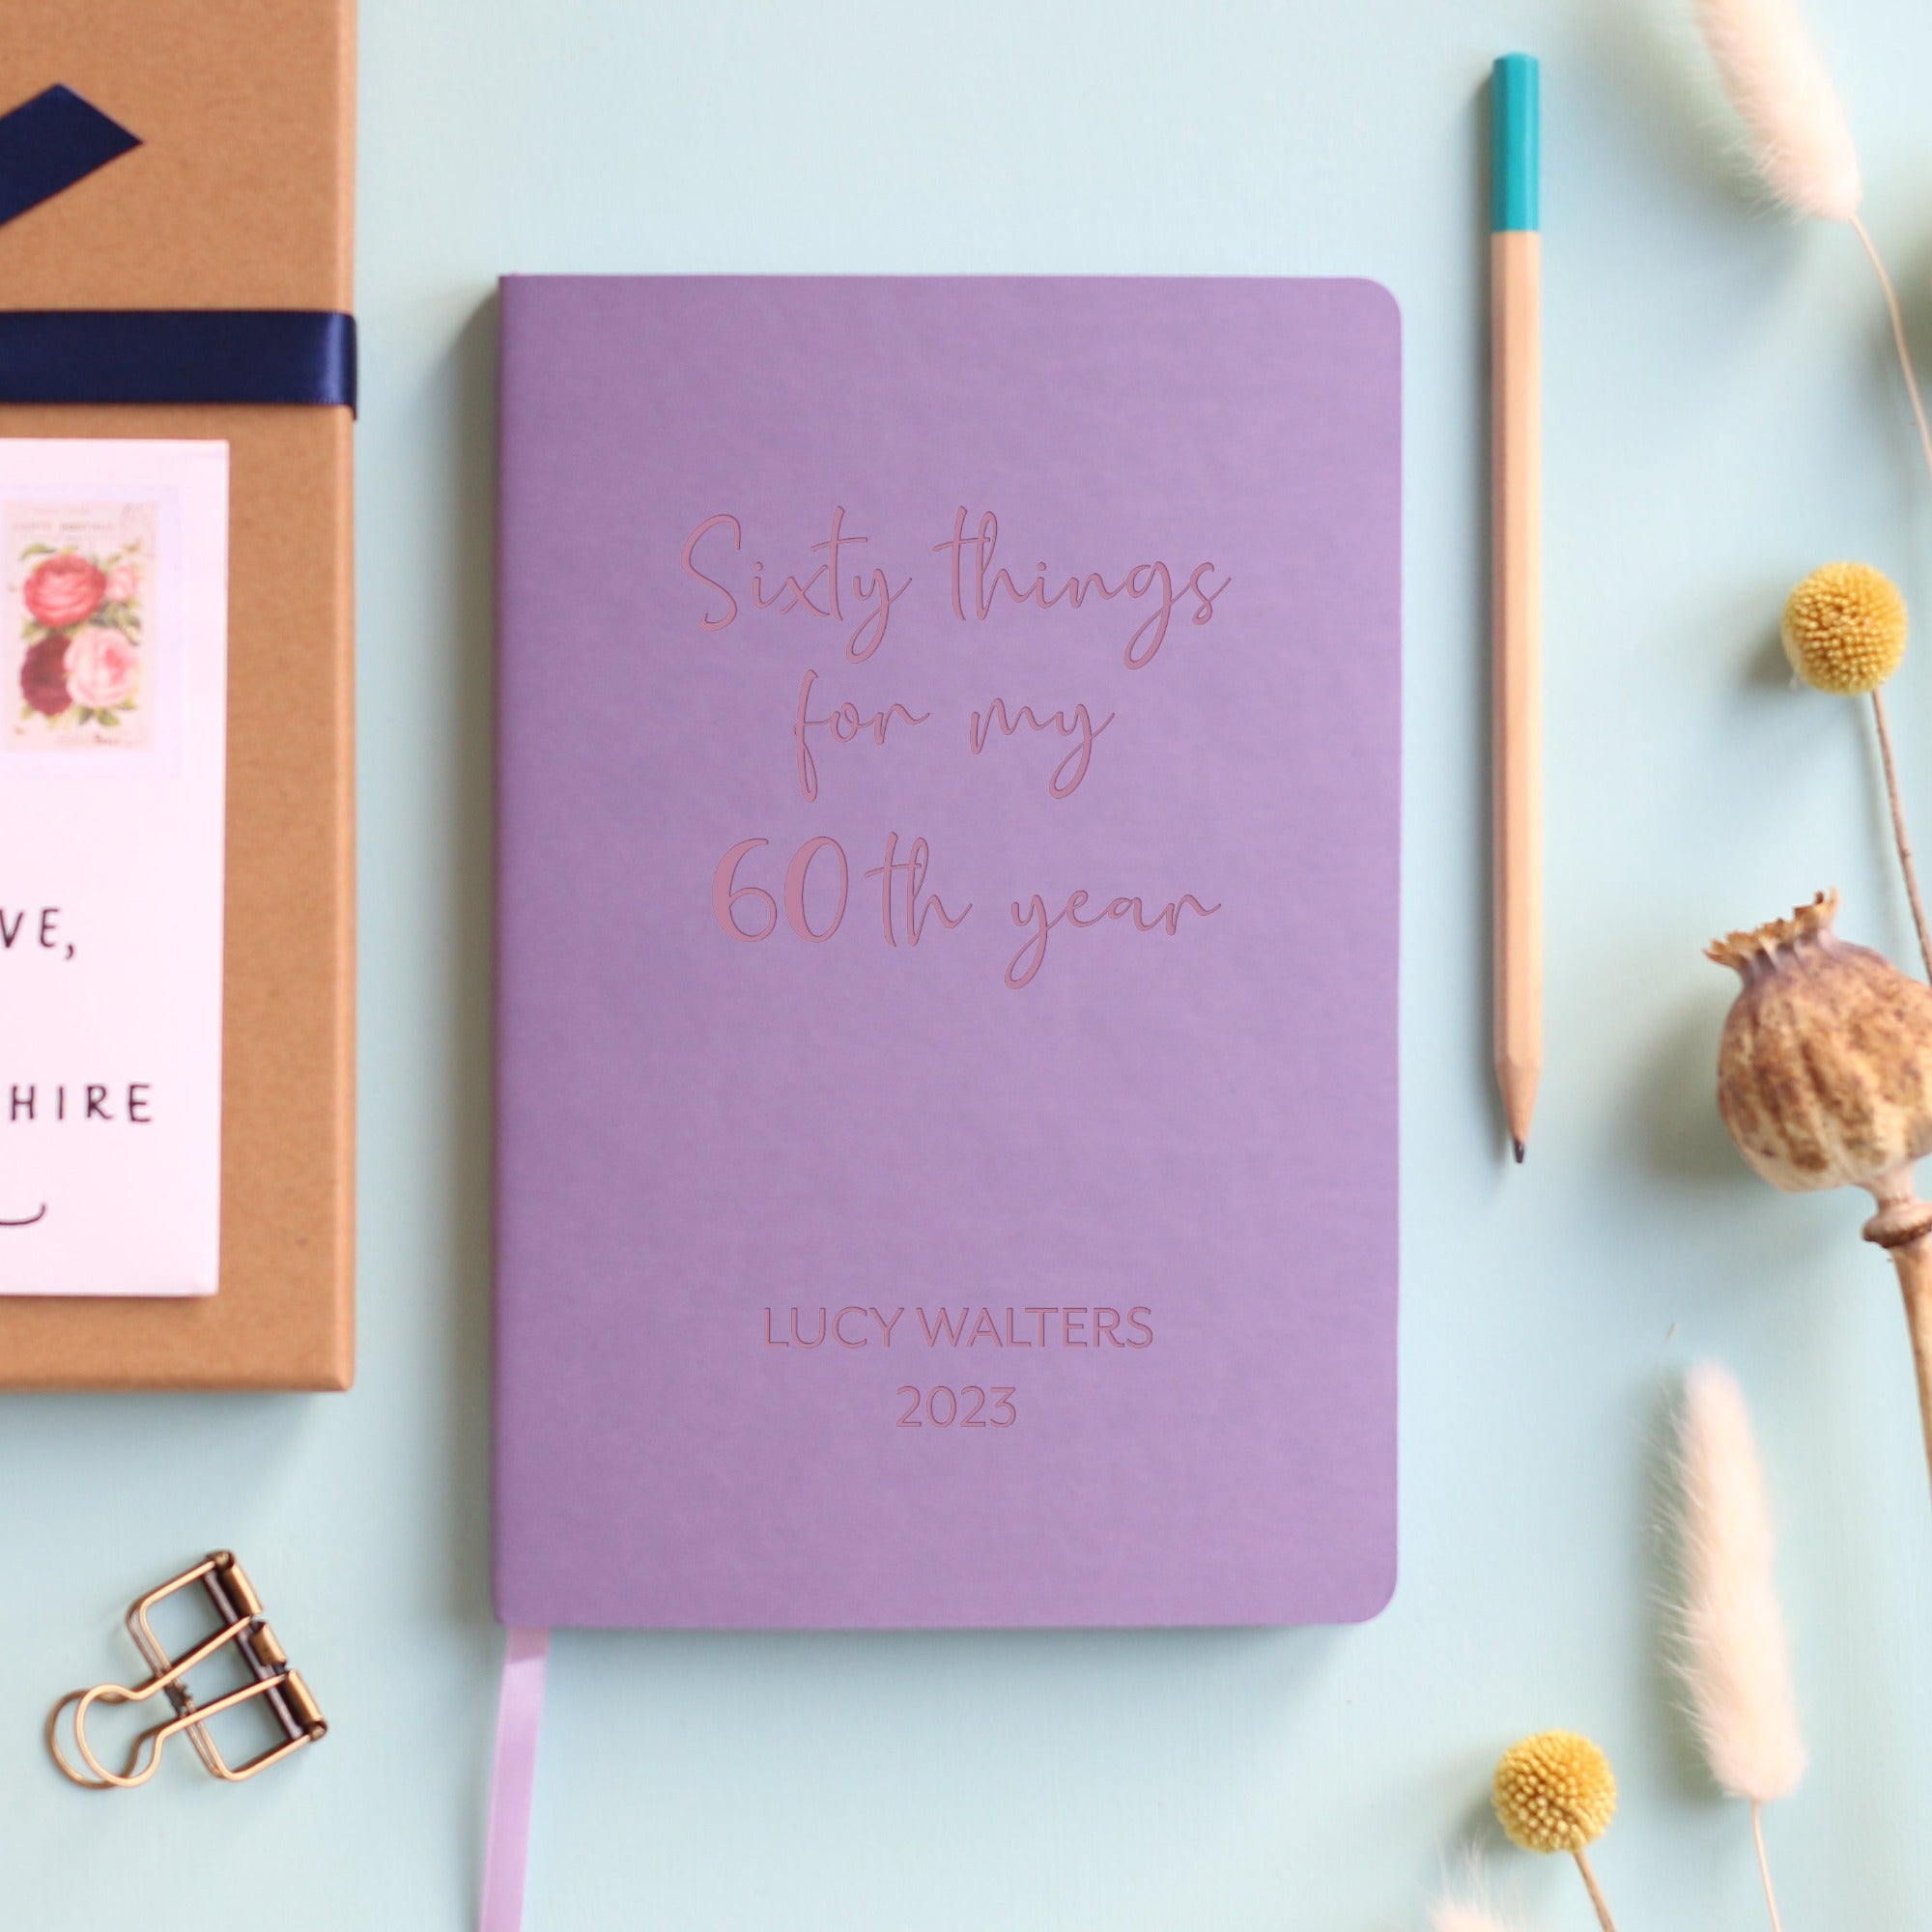 Lilac Vegan leather notebook with personalised laser engraving on the cover saying sixty things for my 60th year